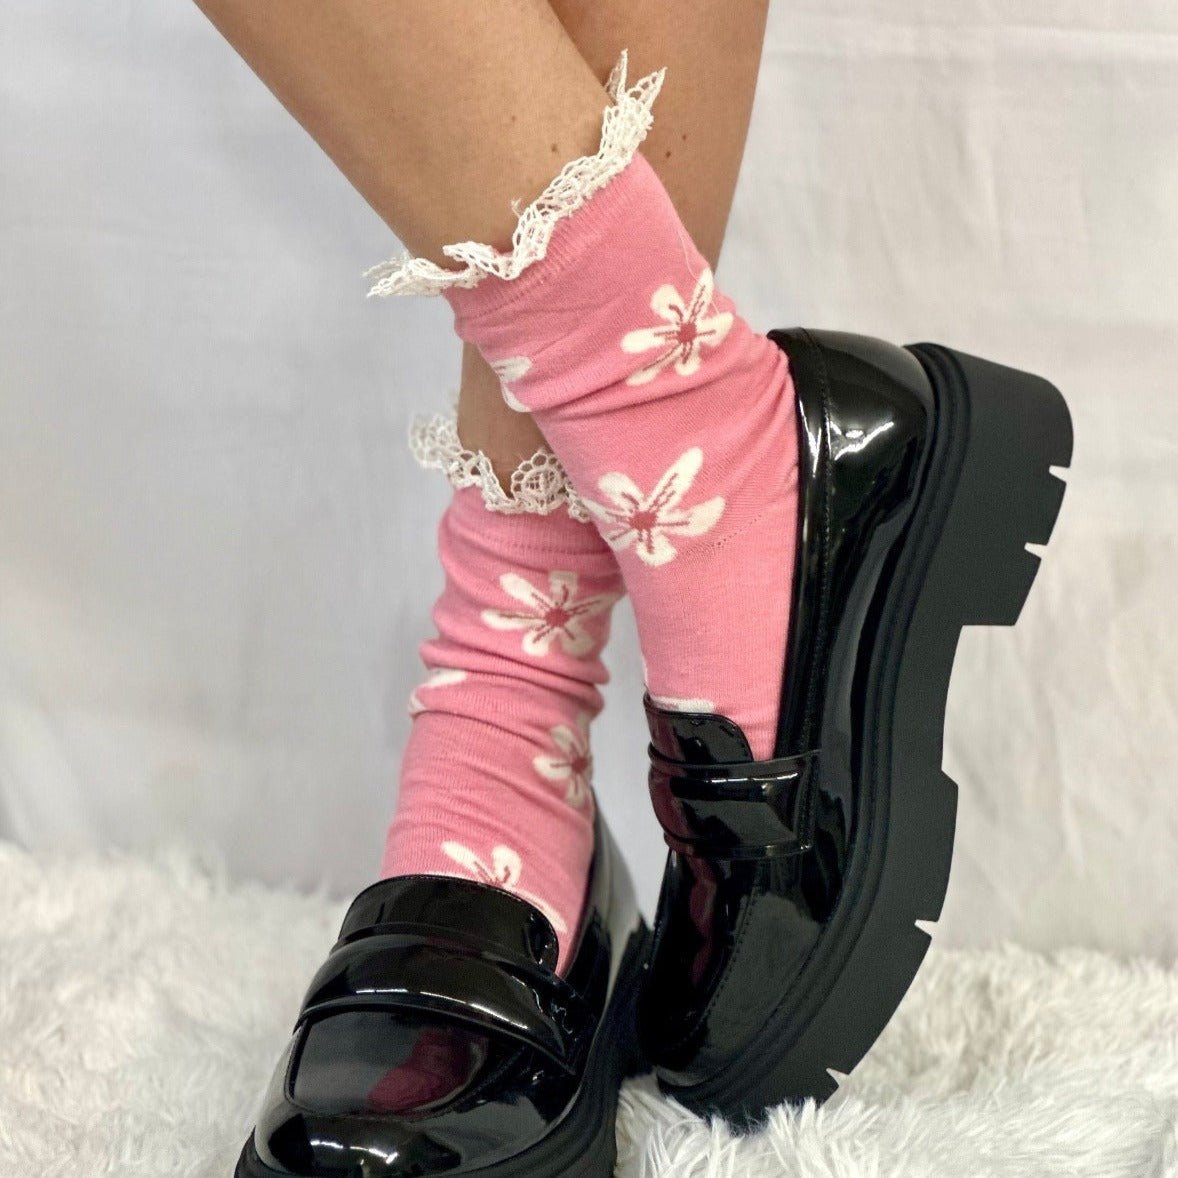 POSEY lace top ankle sock - pink, cute lace socks women quality